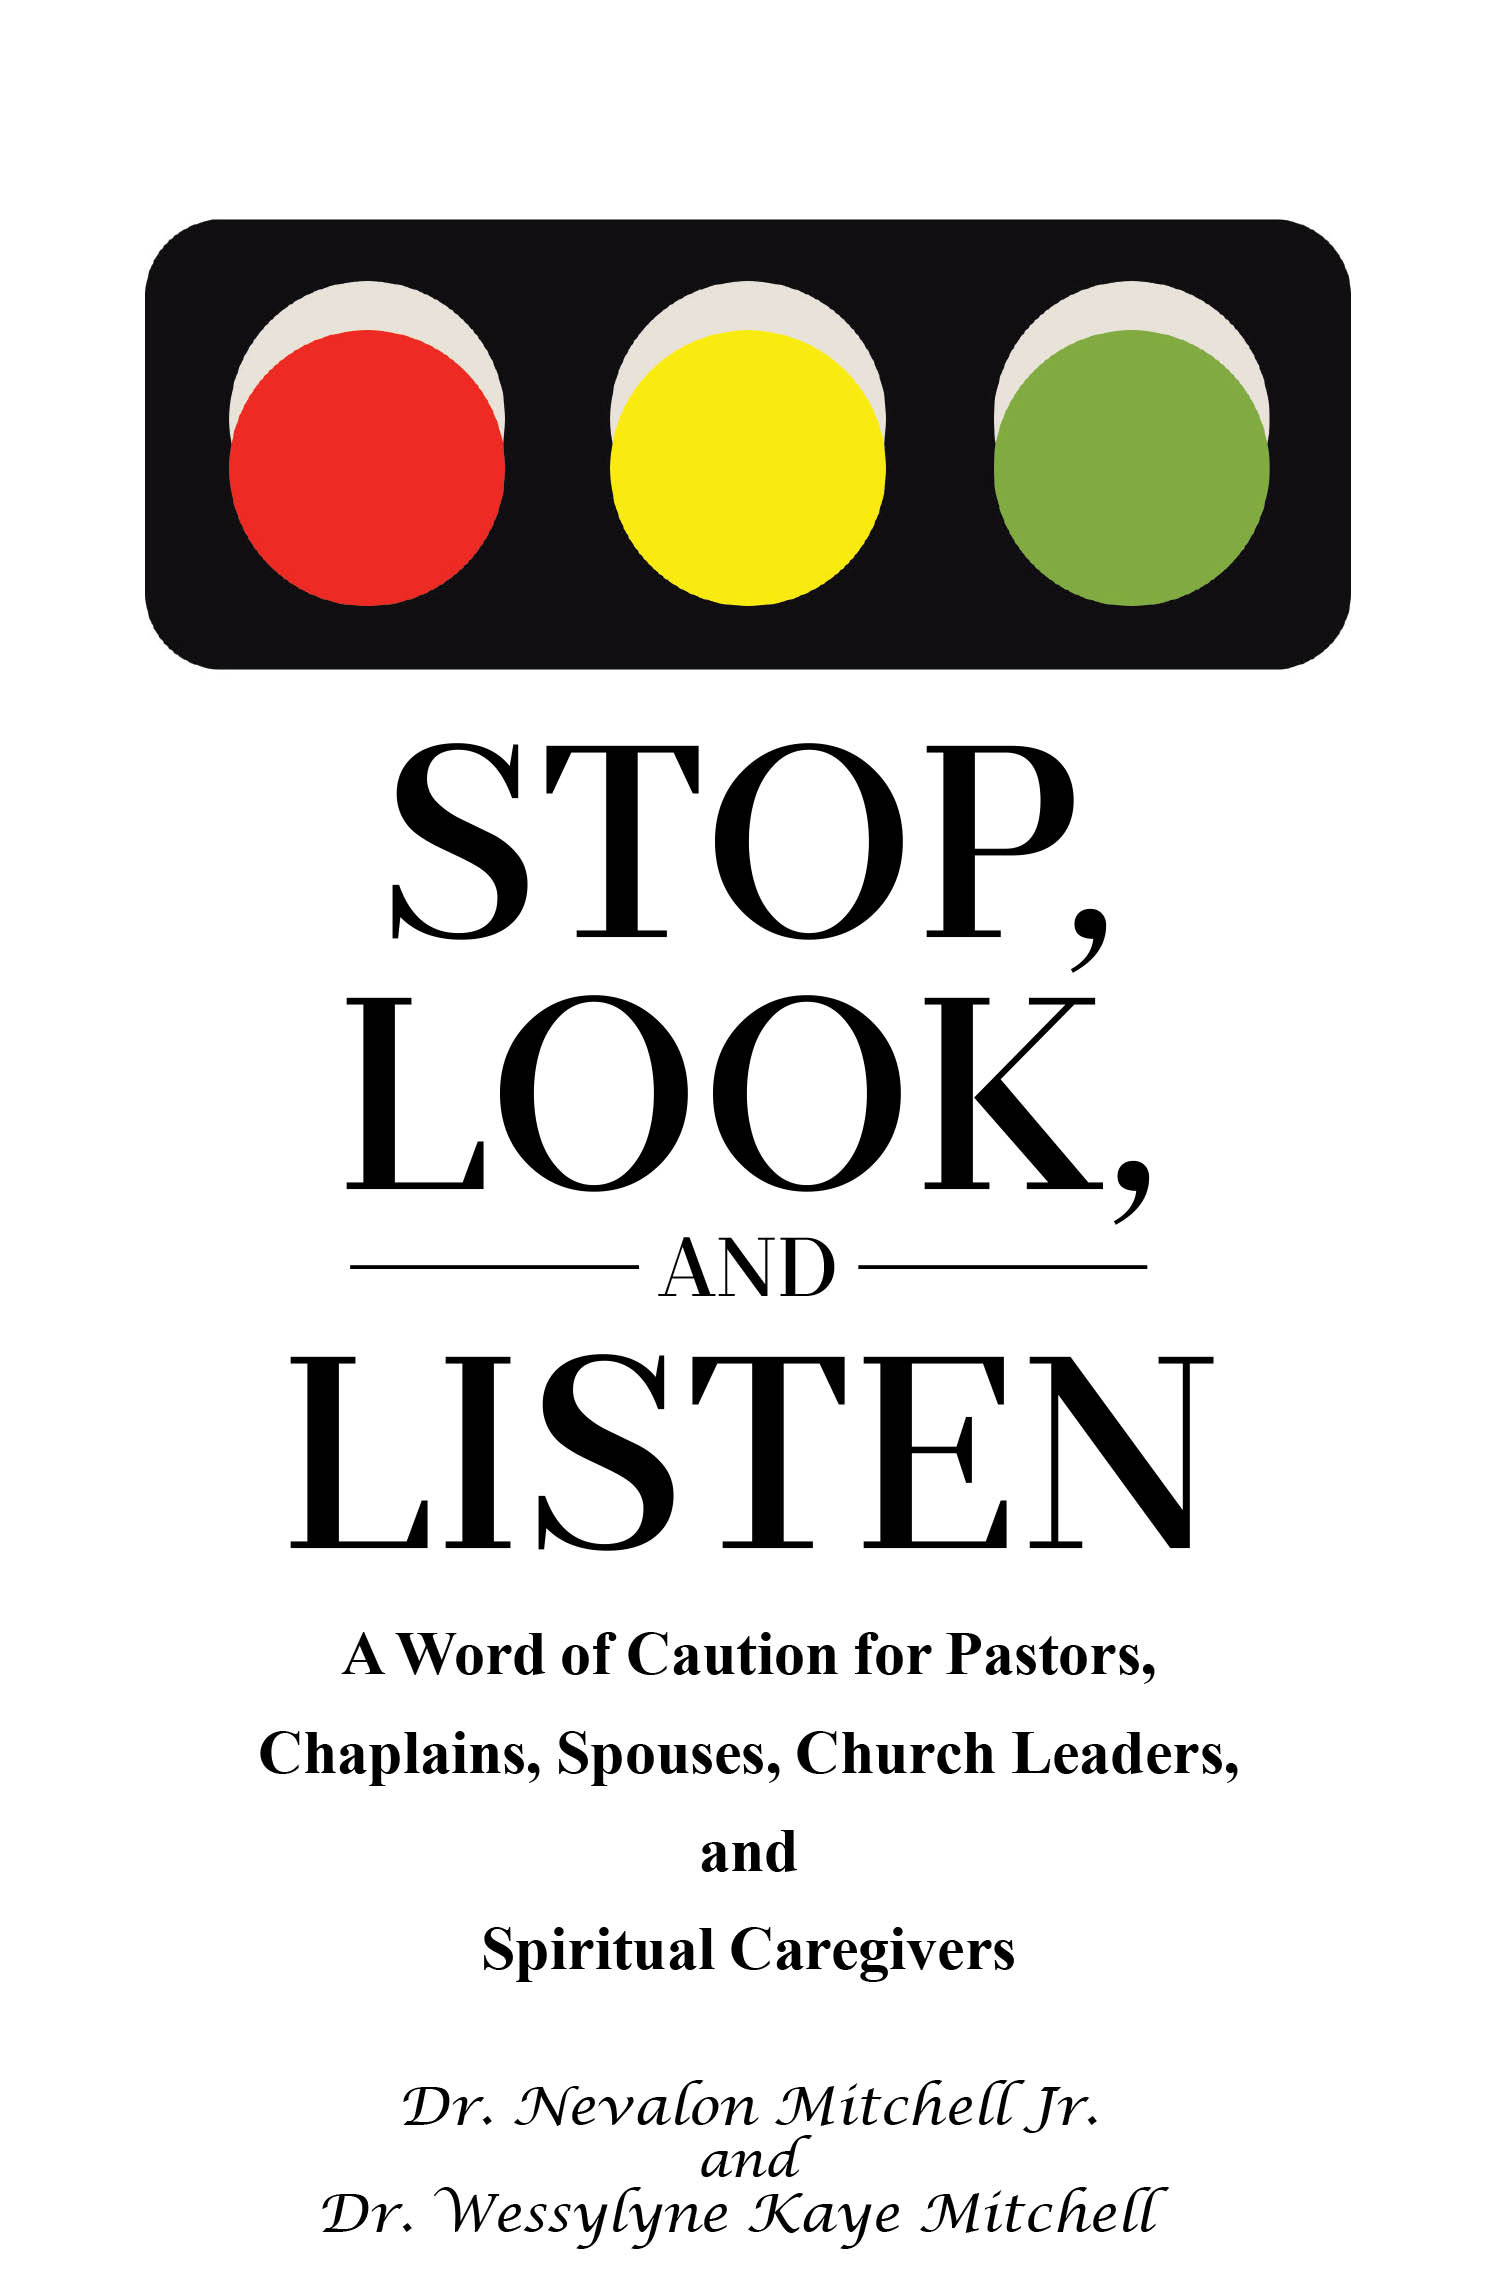 Authors Dr. Nevalon Mitchell Jr. and Dr. Wessylyne Kaye Mitchell’s New Book, "Stop, Look, and Listen," is a Crucial Resource for Navigating the Challenges of Ministry